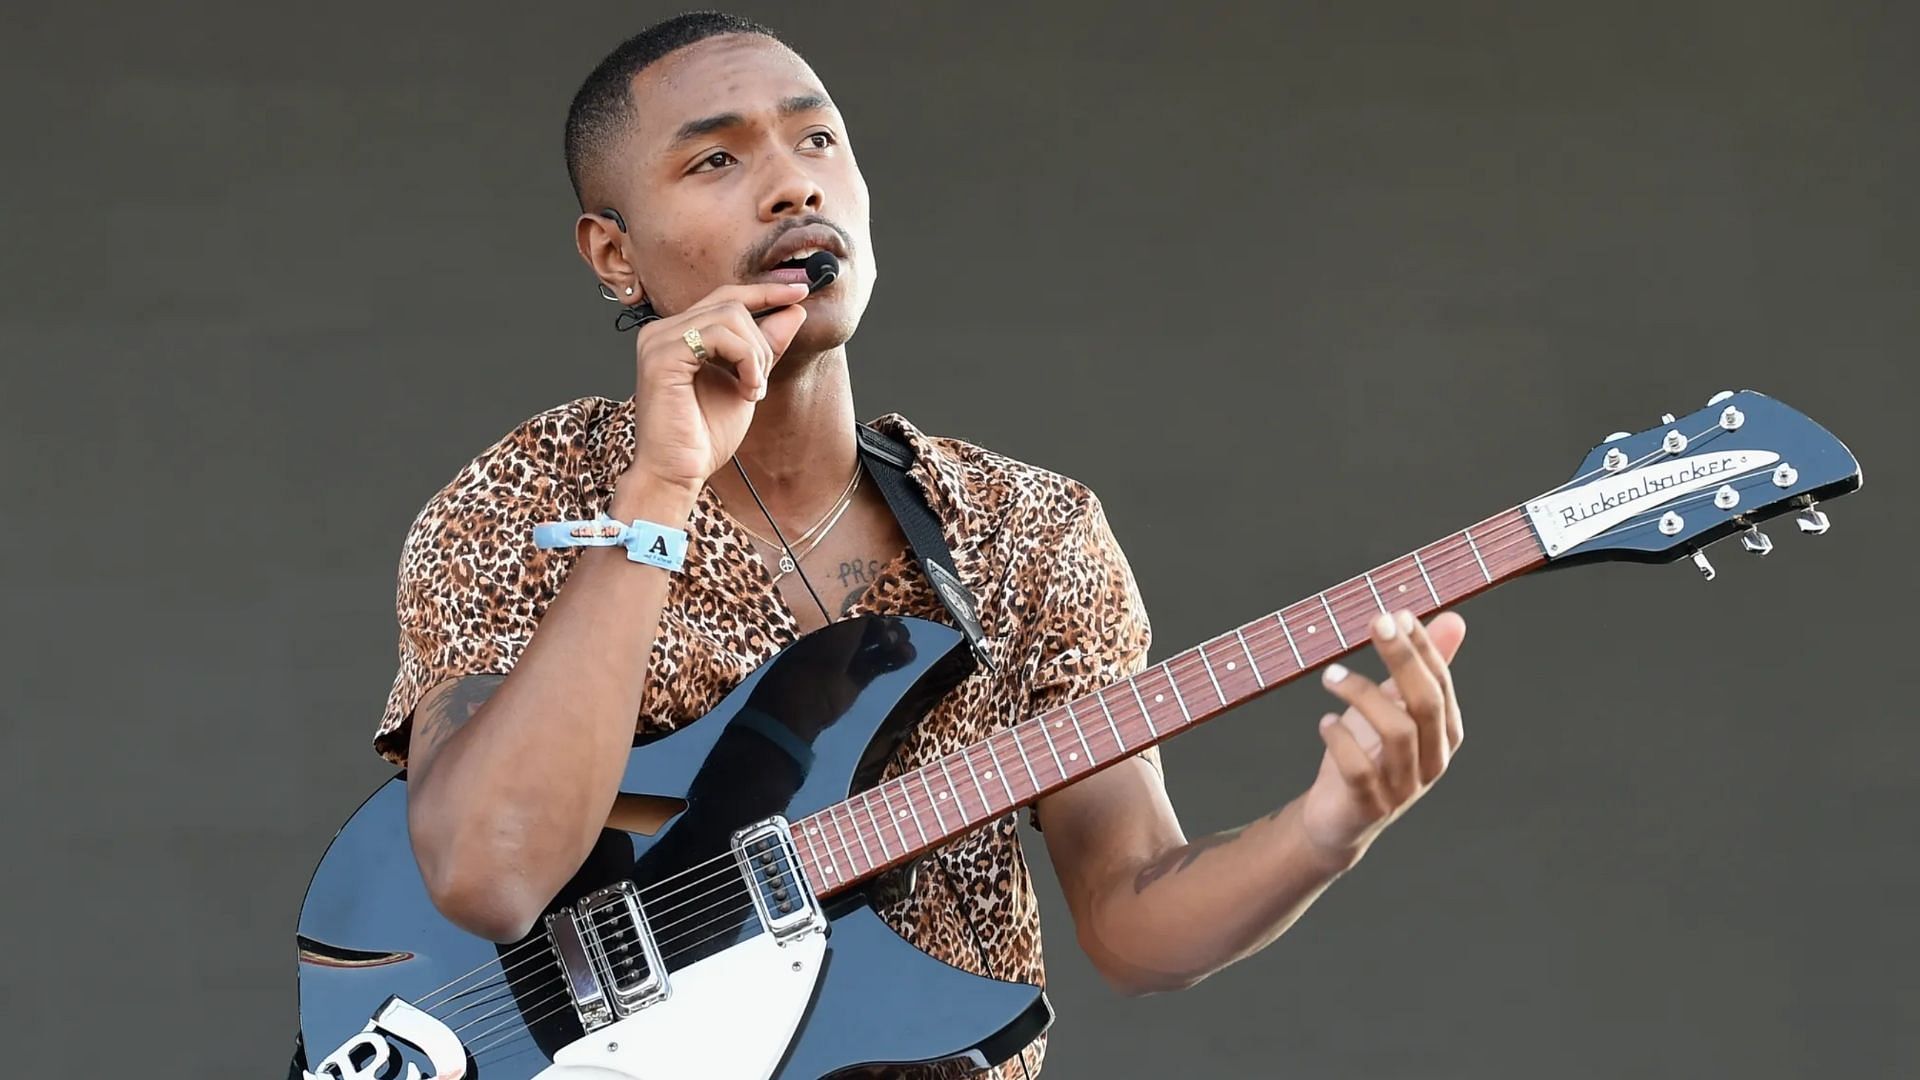 Steve Lacy on 'Bad Habit' Fame, His Sexuality and That Camera Smash